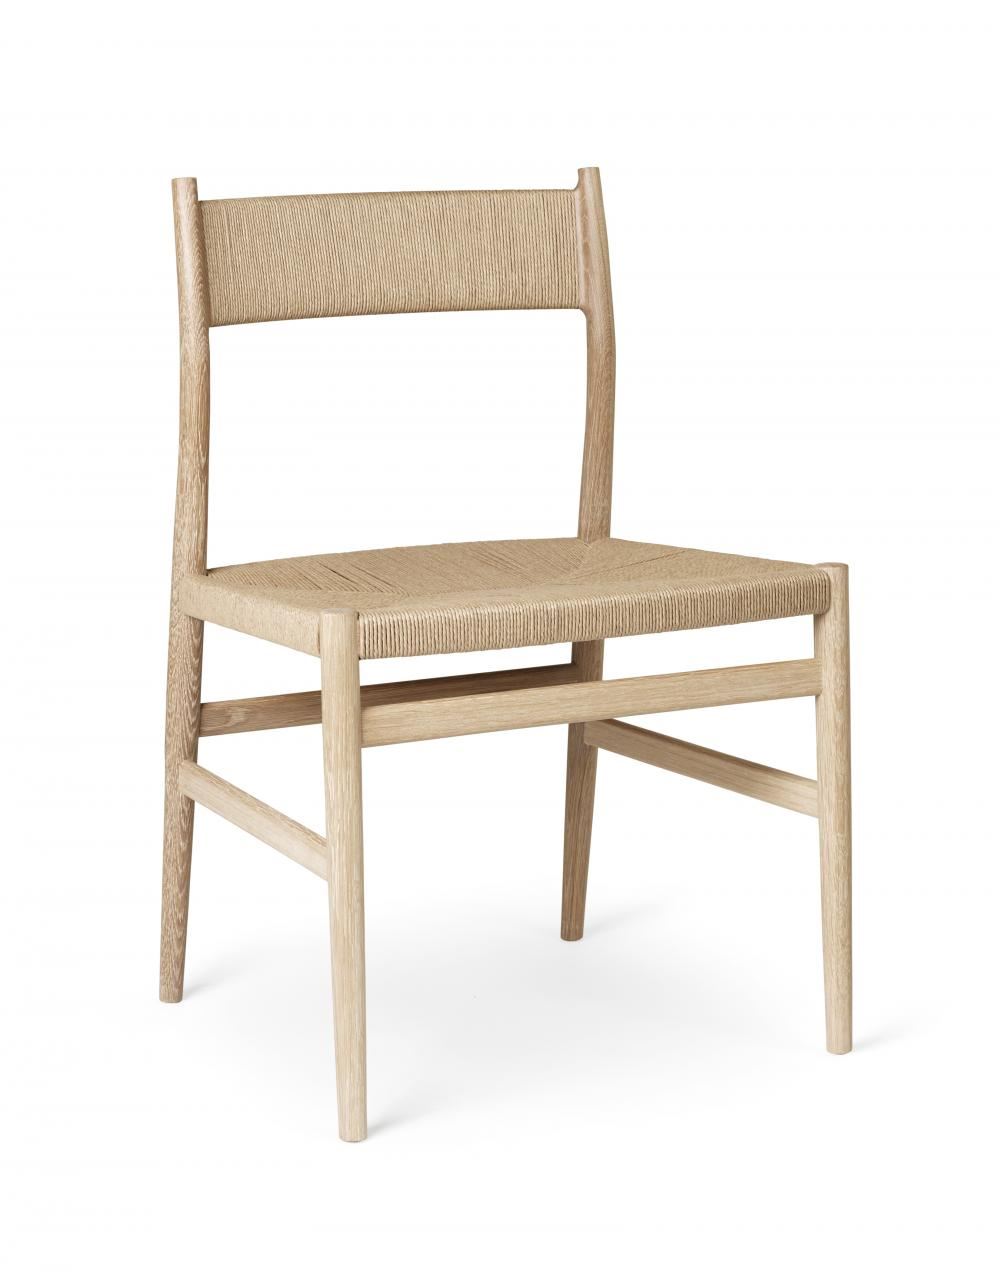 Arv Dining Chair Waxed Oiled Oak Weaved Seat Back Without Armrest